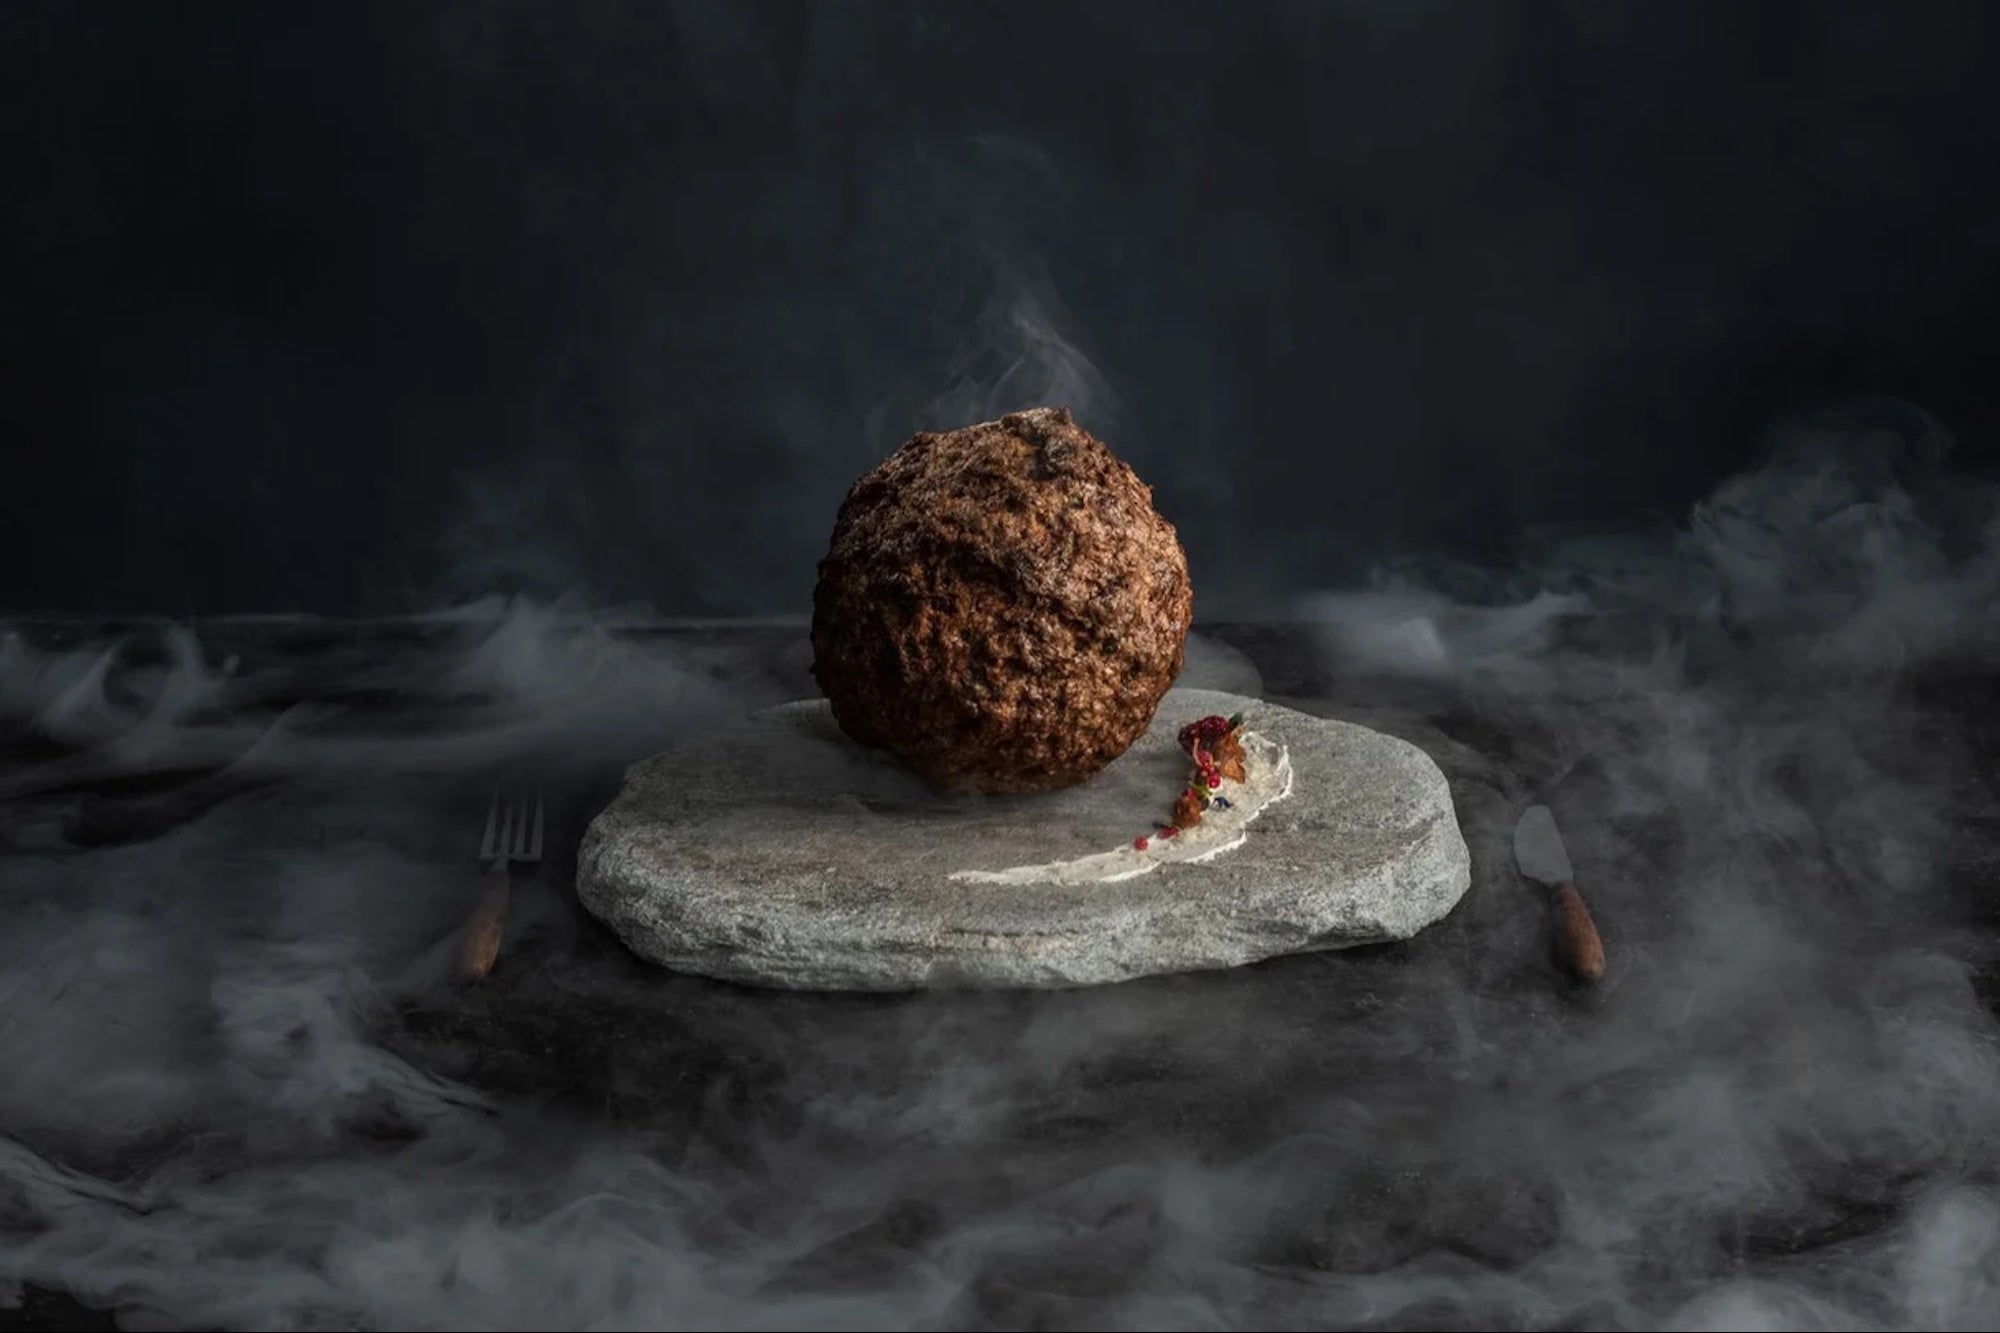 Food Startup Introduces a Meatball Made From Woolly Mammoth